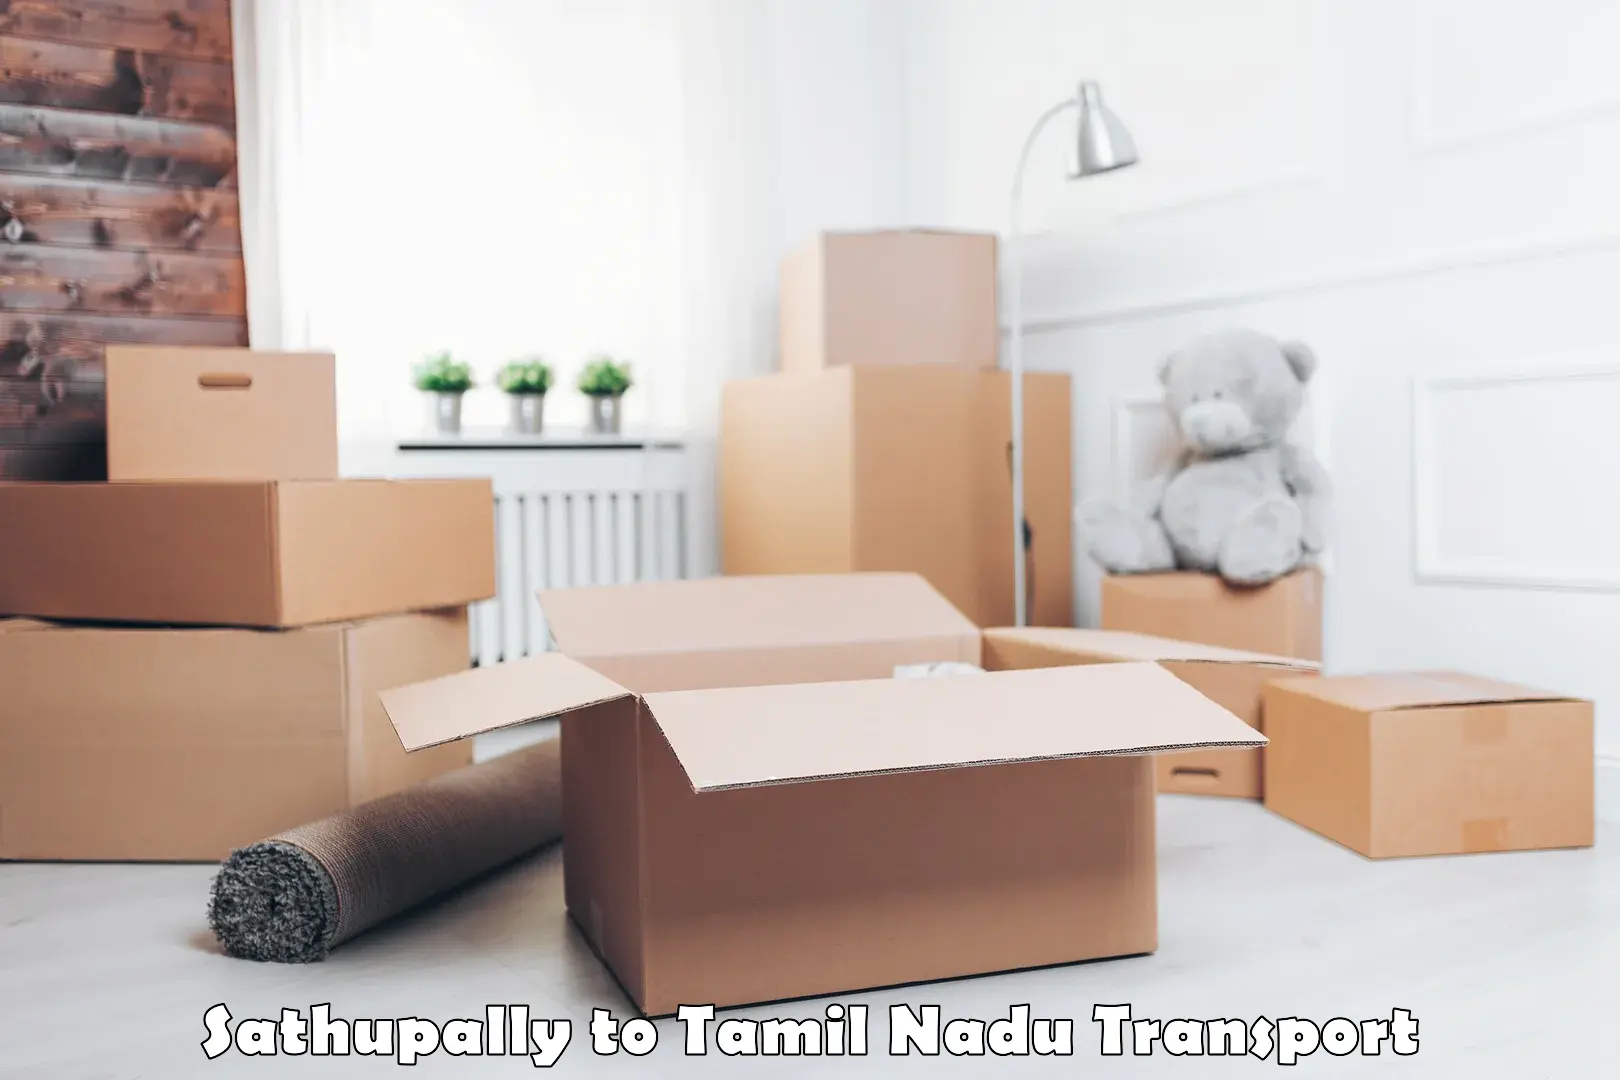 Domestic goods transportation services Sathupally to Madurai